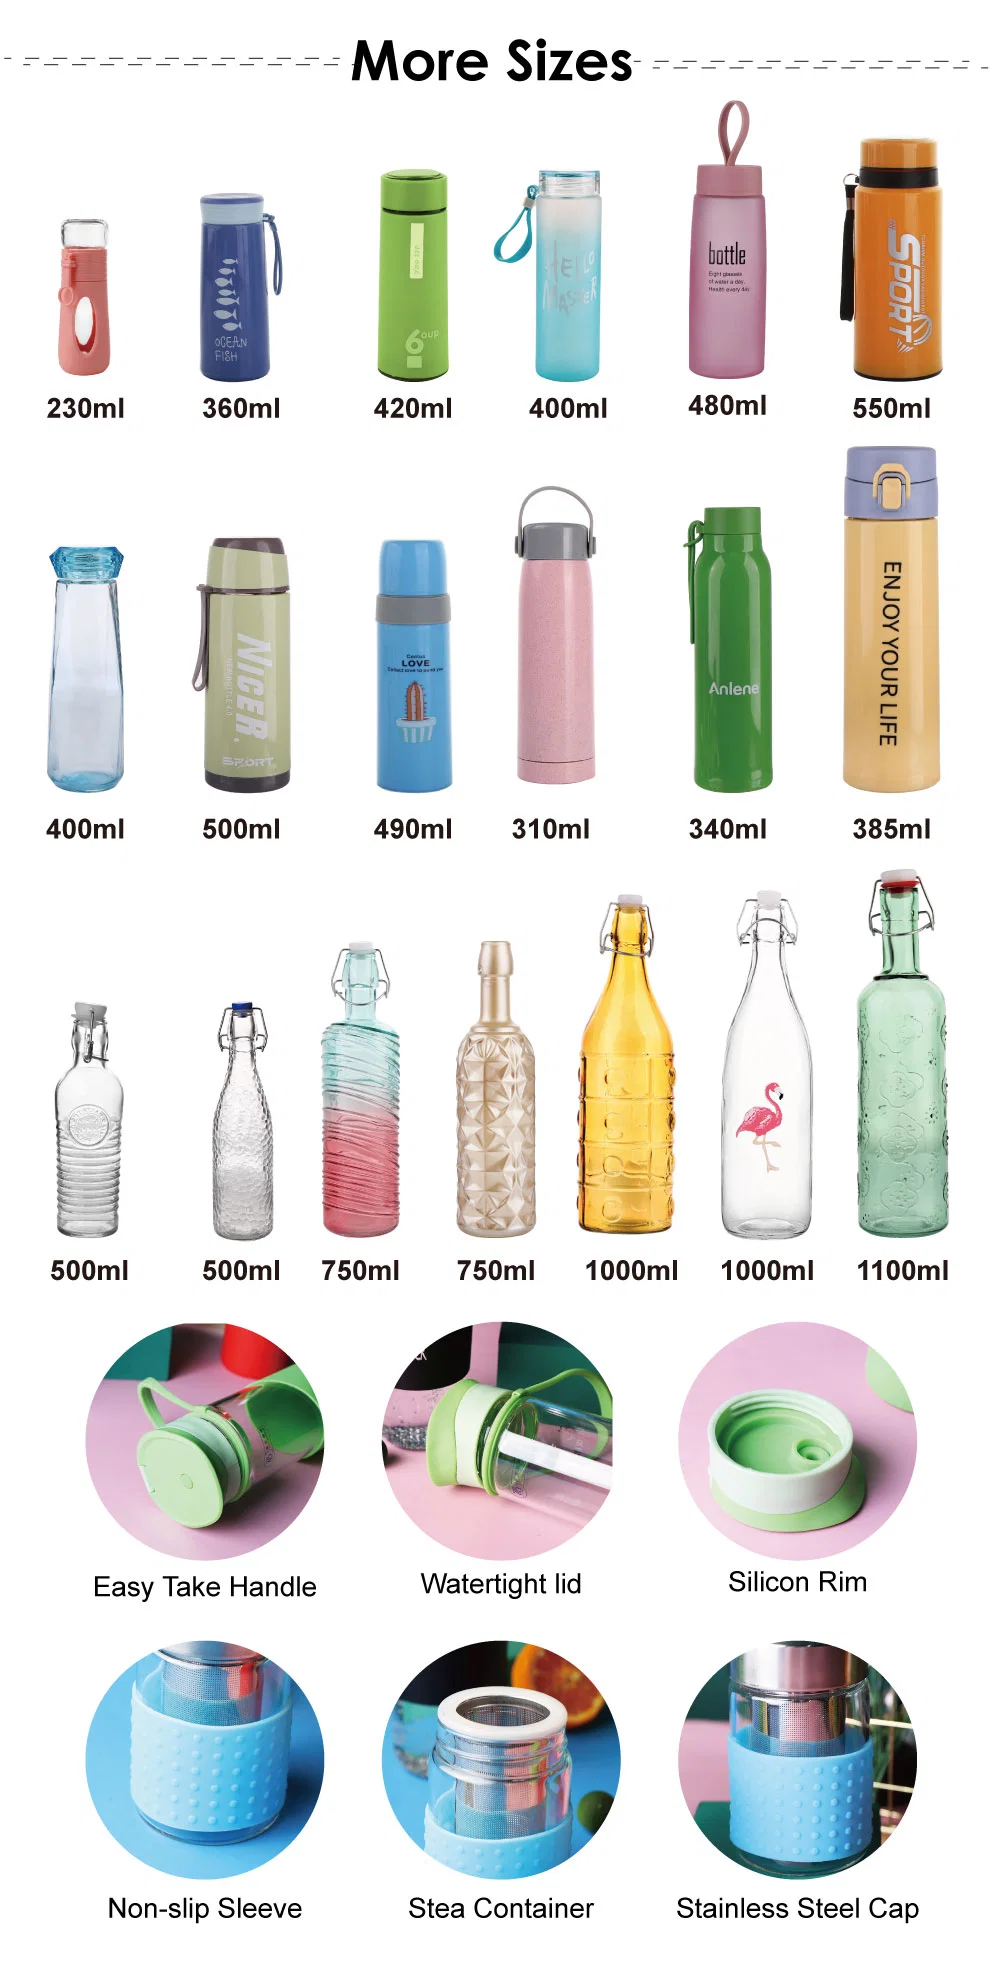 3 Sizes Best Selling Glass Bottle Outer Space Pattern Design Glassware for Liquid Storage